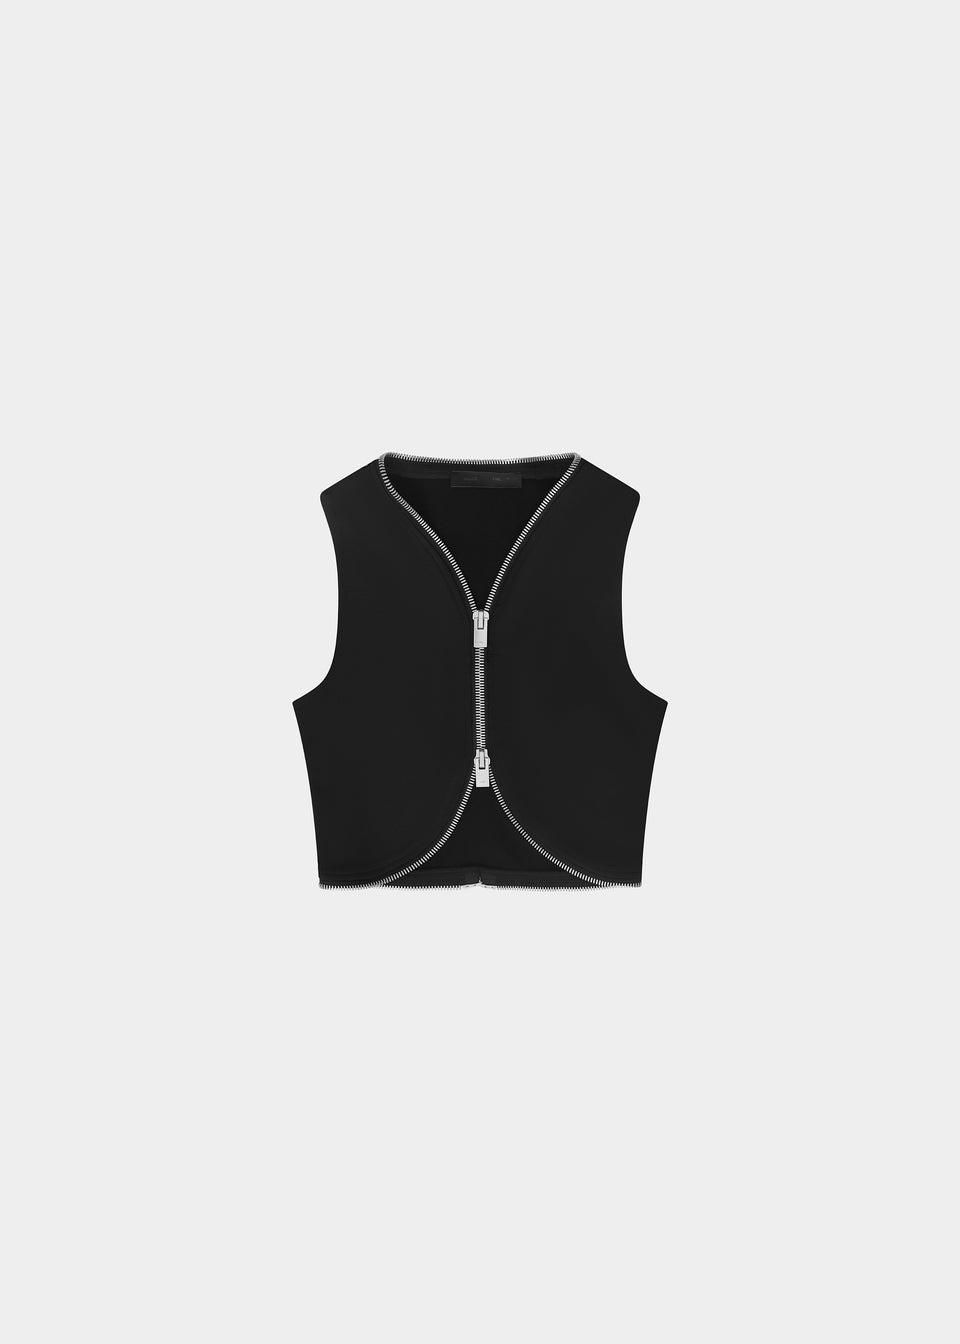 OBOVATE JERSEY TOP by HELIOT EMIL